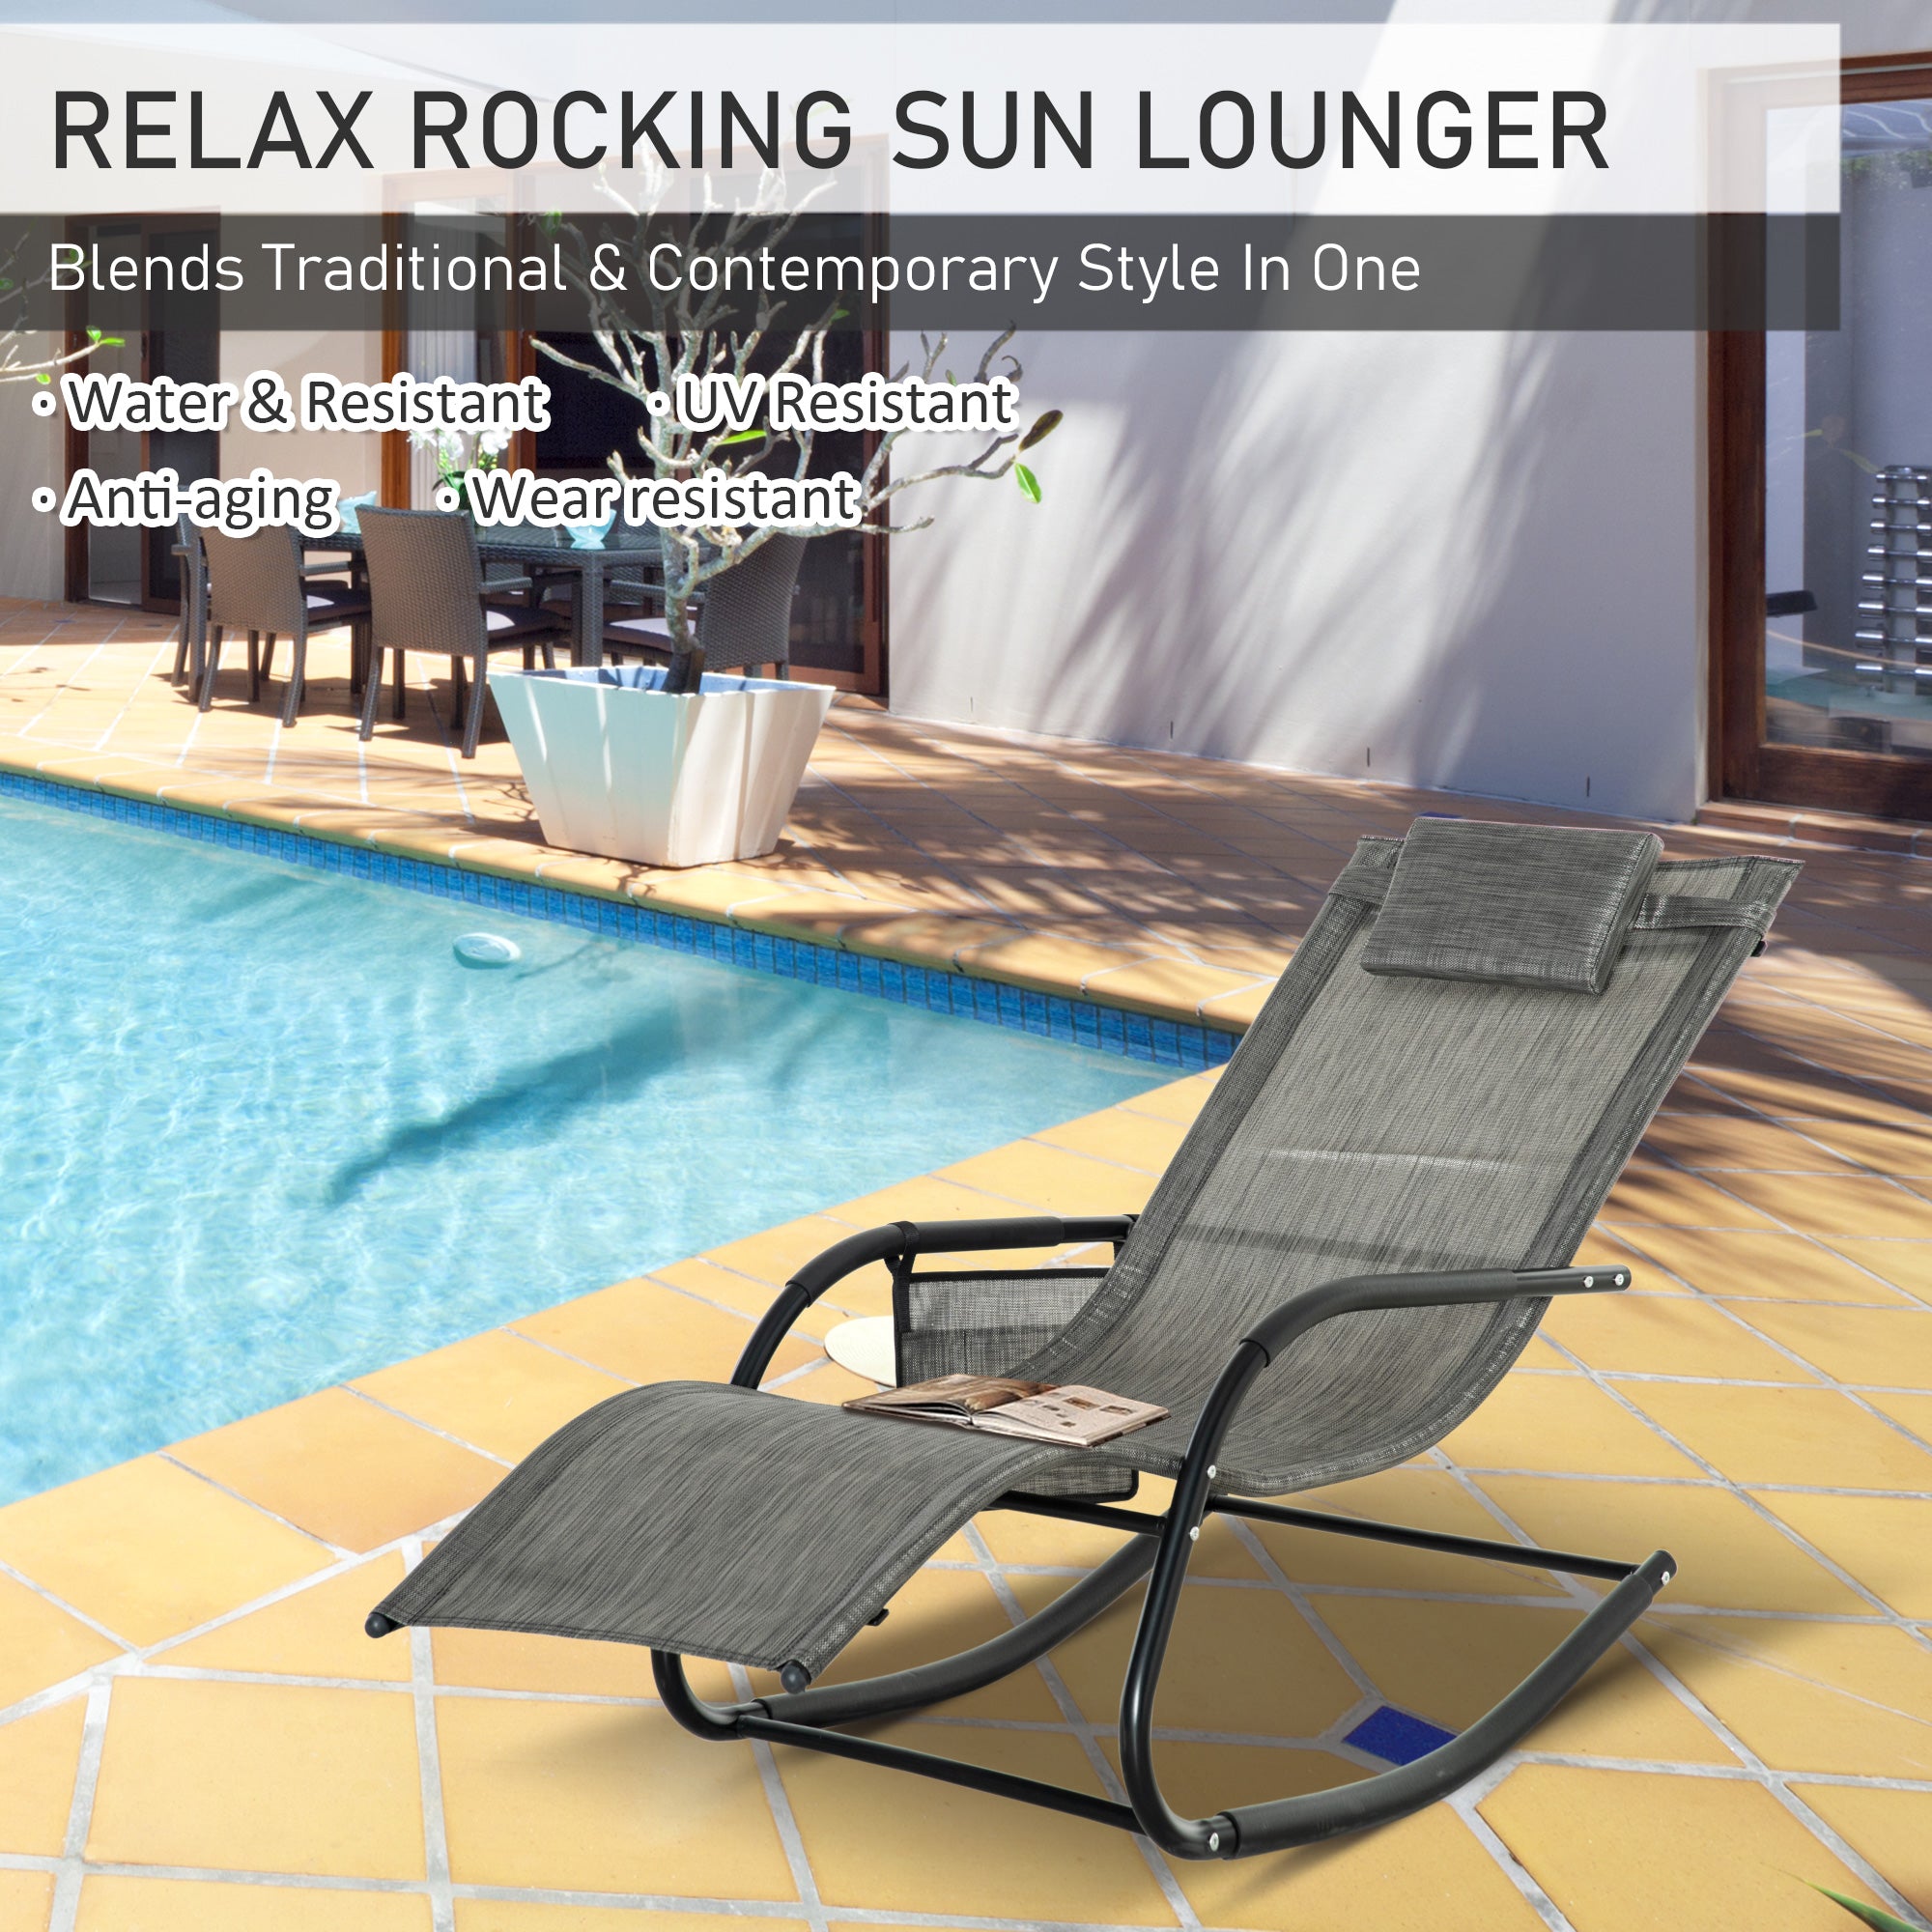 Outsunny Breathable Mesh Rocking Chair Patio Rocker Lounge for Indoor & Outdoor Recliner Seat w/ Removable Headrest for Garden and Patio Dark Grey - Inspirely